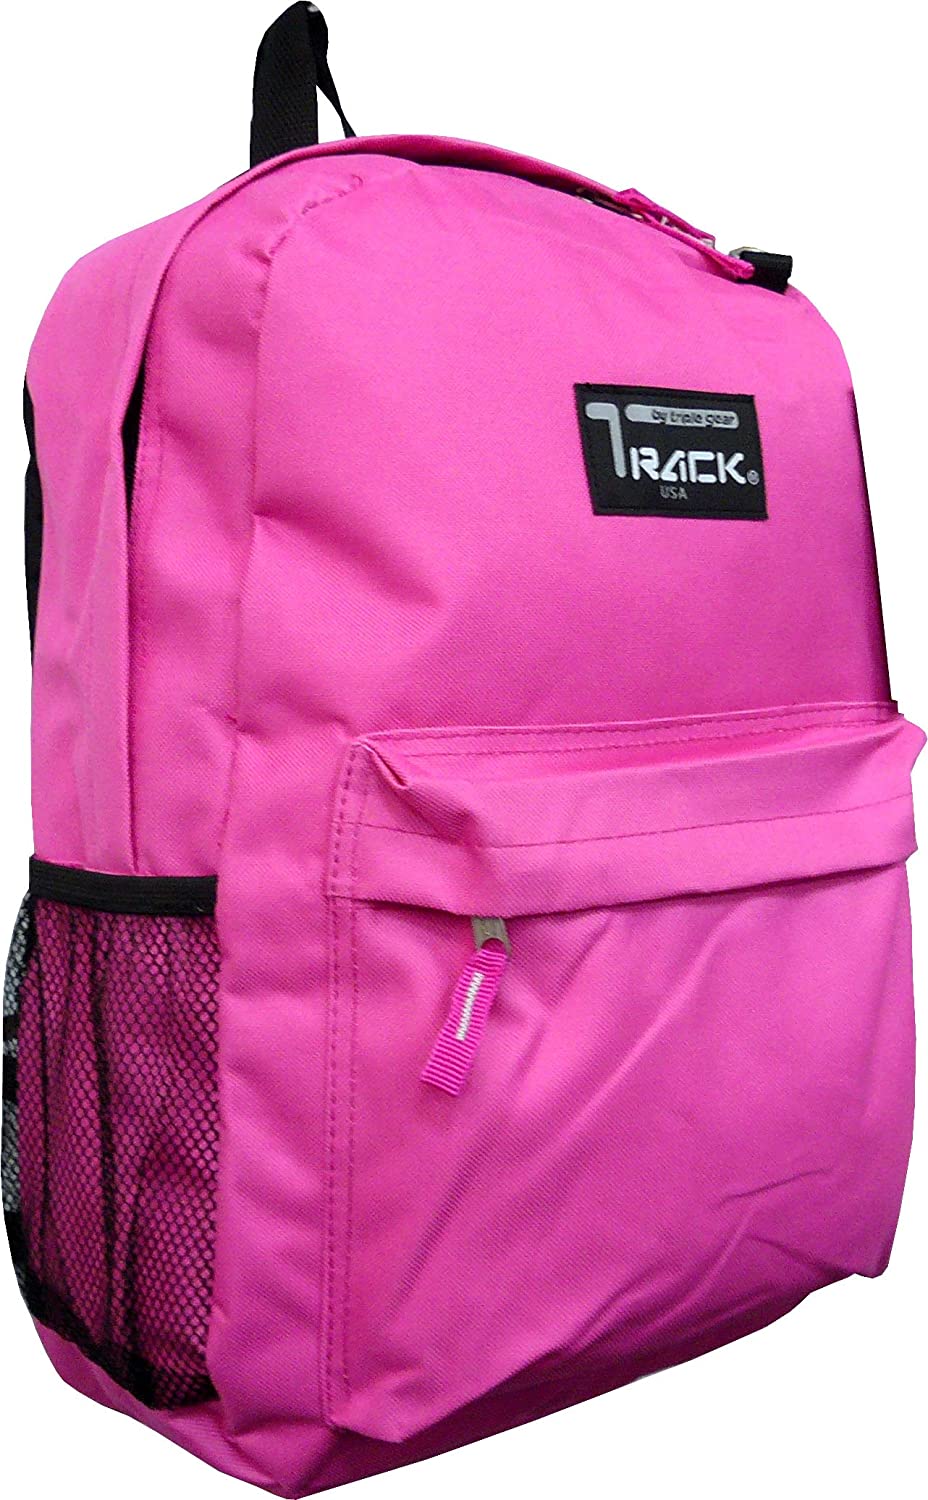 Track Classic Backpack TB205 (Pink)